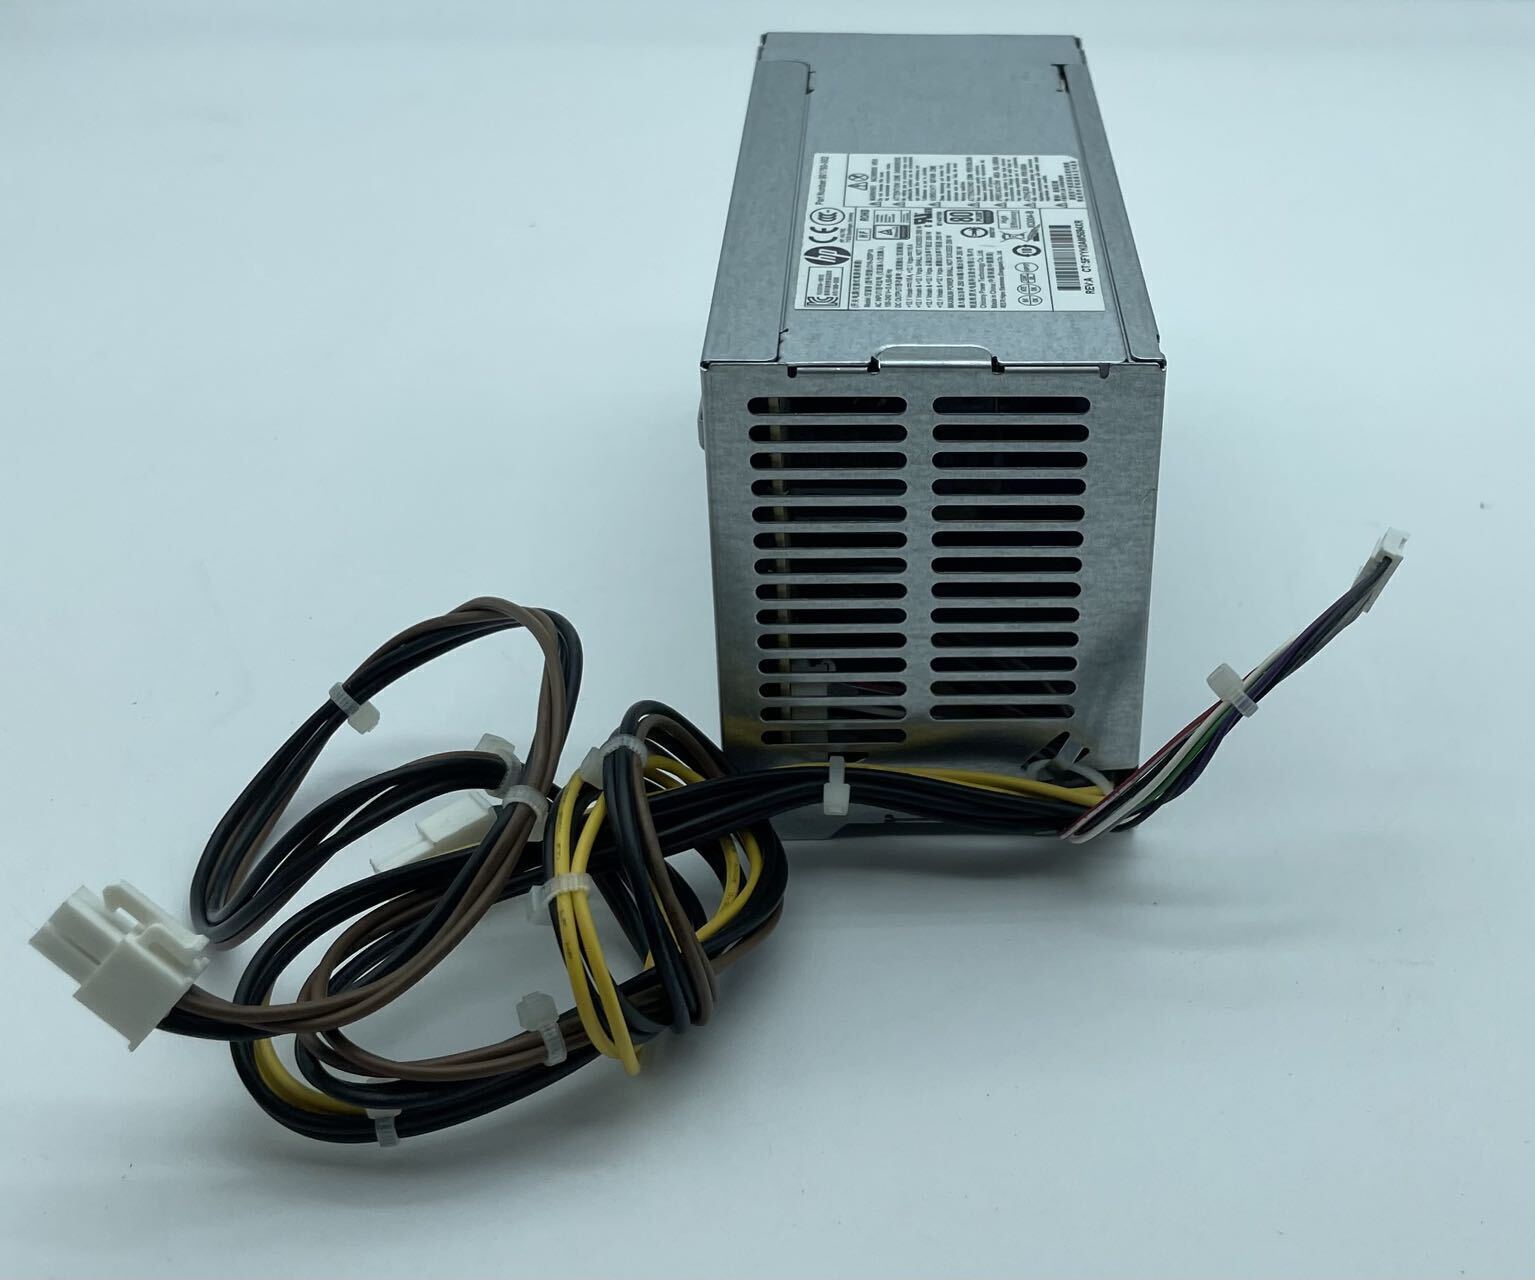 Power Supply 250W D16-250P1A 901760-001 002 004 PCG022 For HP 400 600G4 800G3